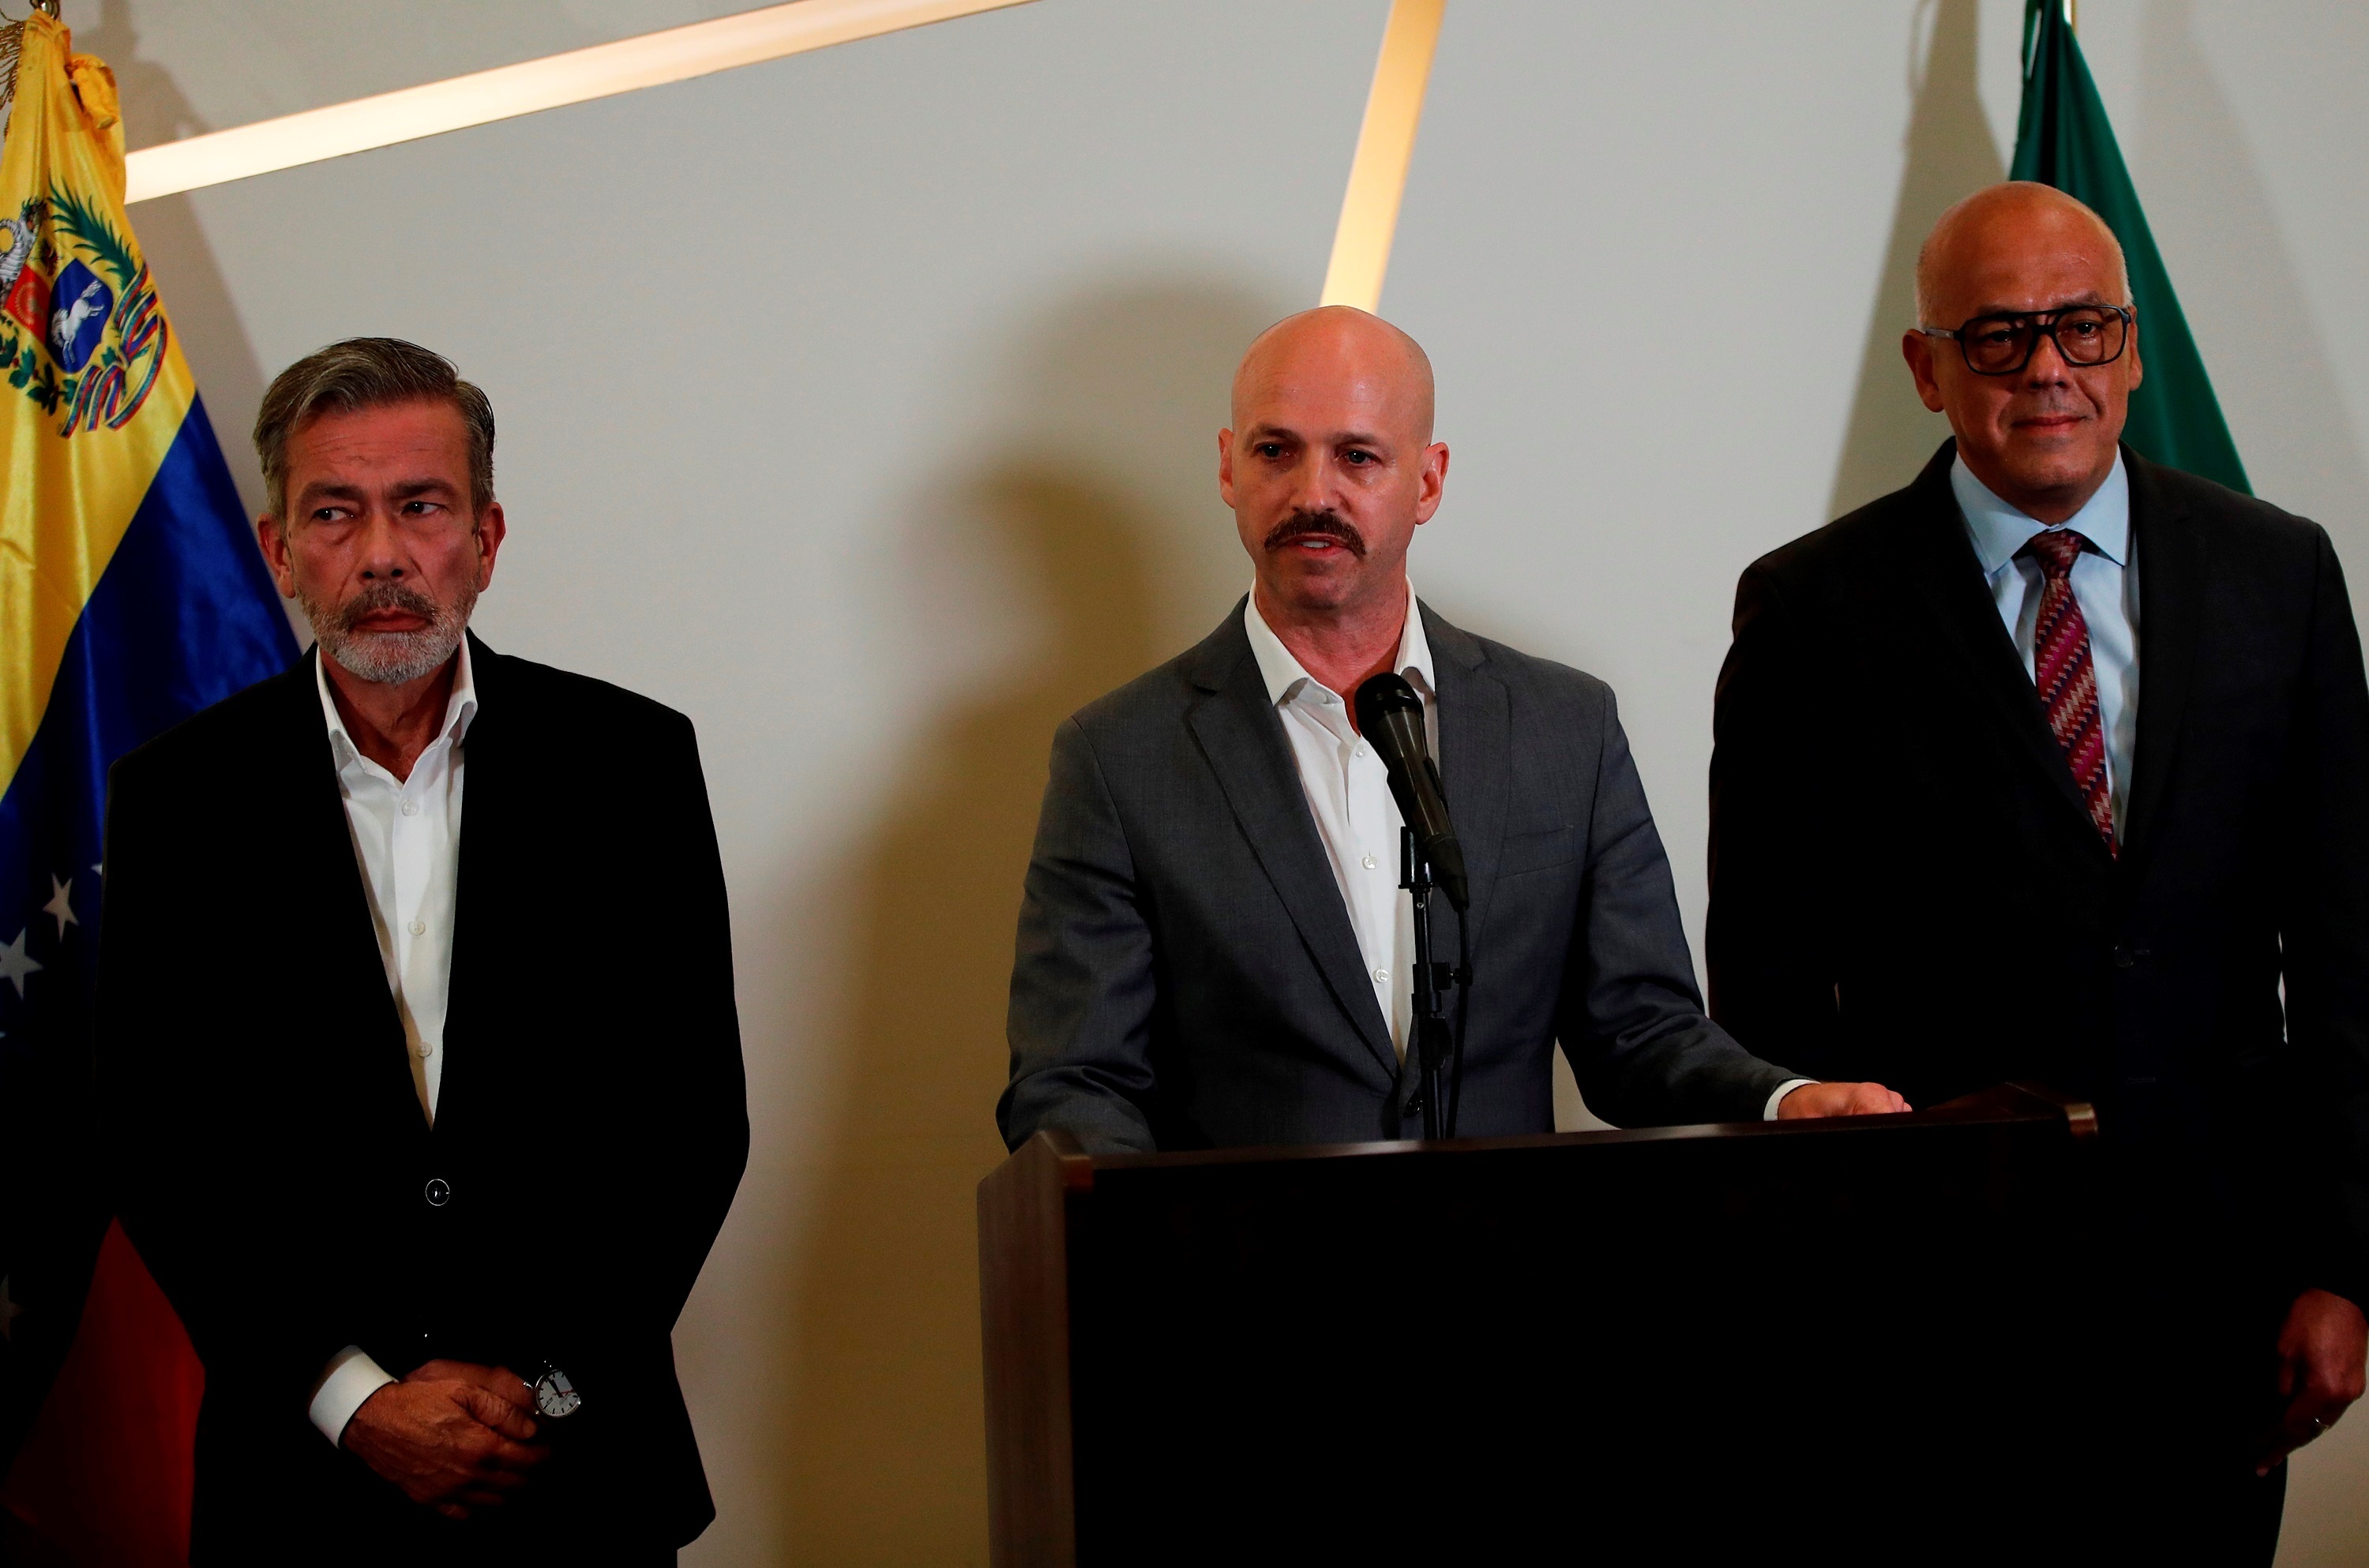 The representative of the Venezuelan opposition Gerardo Blyde Pérez, the director of the Norwegian Center for Conflict Resolution Dag Nylander and the president of the National Assembly of Venezuela, Jorge Rodríguez, during a press conference in Mexico City (EFE / José Méndez)